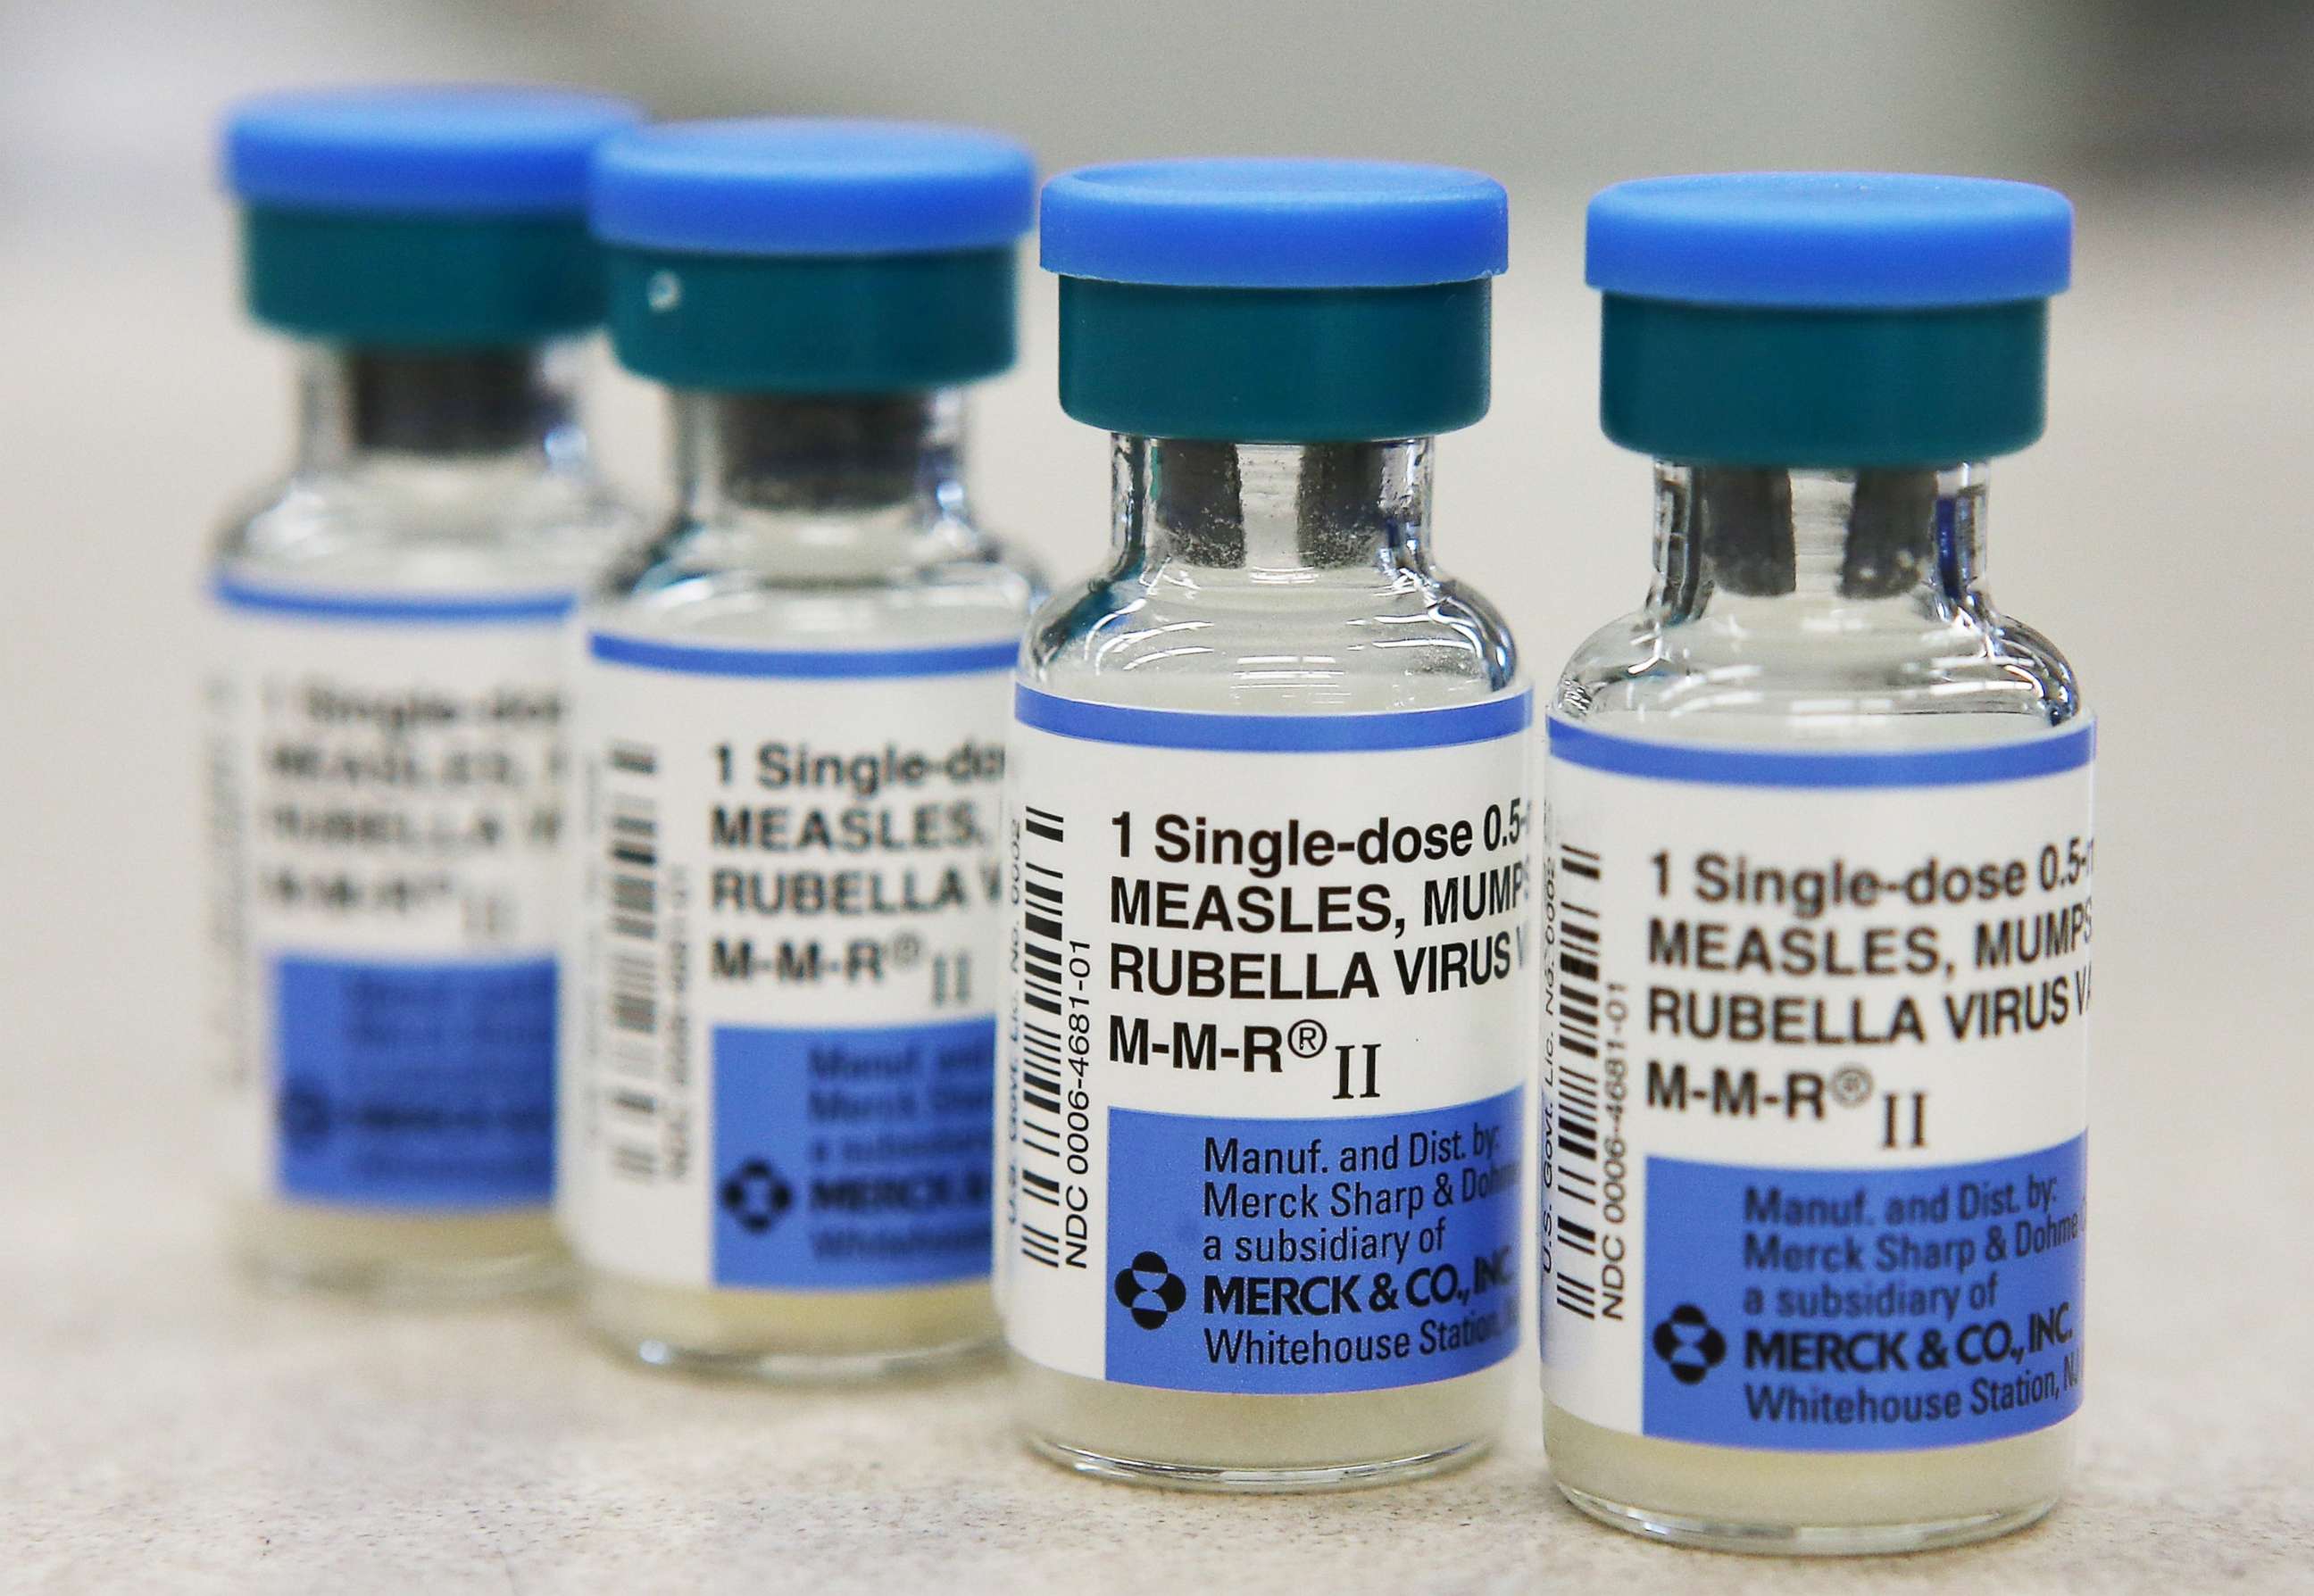 PHOTO: In this January 26, 2015, file photo, vials of measles, mumps and rubella vaccine are displayed on a counter at a Walgreens Pharmacy in Mill Valley, Calif.